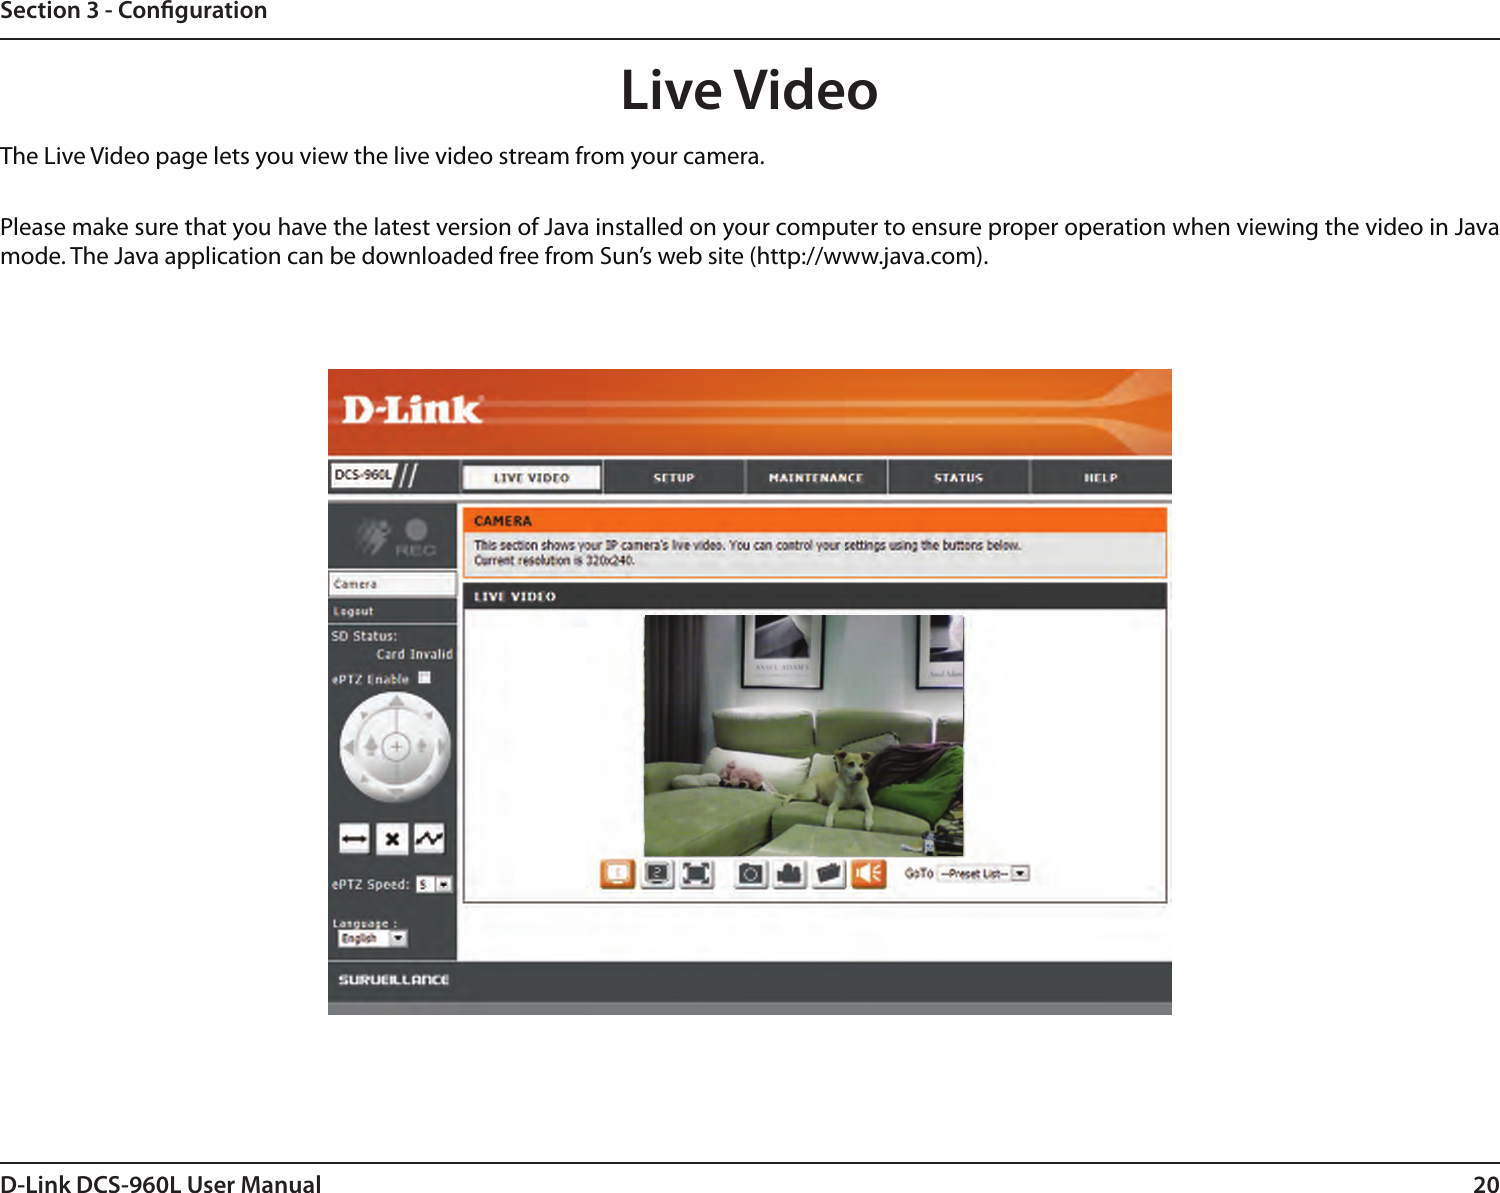 20D-Link DCS-960L User ManualSection 3 - CongurationLive VideoThe Live Video page lets you view the live video stream from your camera.Please make sure that you have the latest version of Java installed on your computer to ensure proper operation when viewing the video in Java mode. The Java application can be downloaded free from Sun’s web site (http://www.java.com).